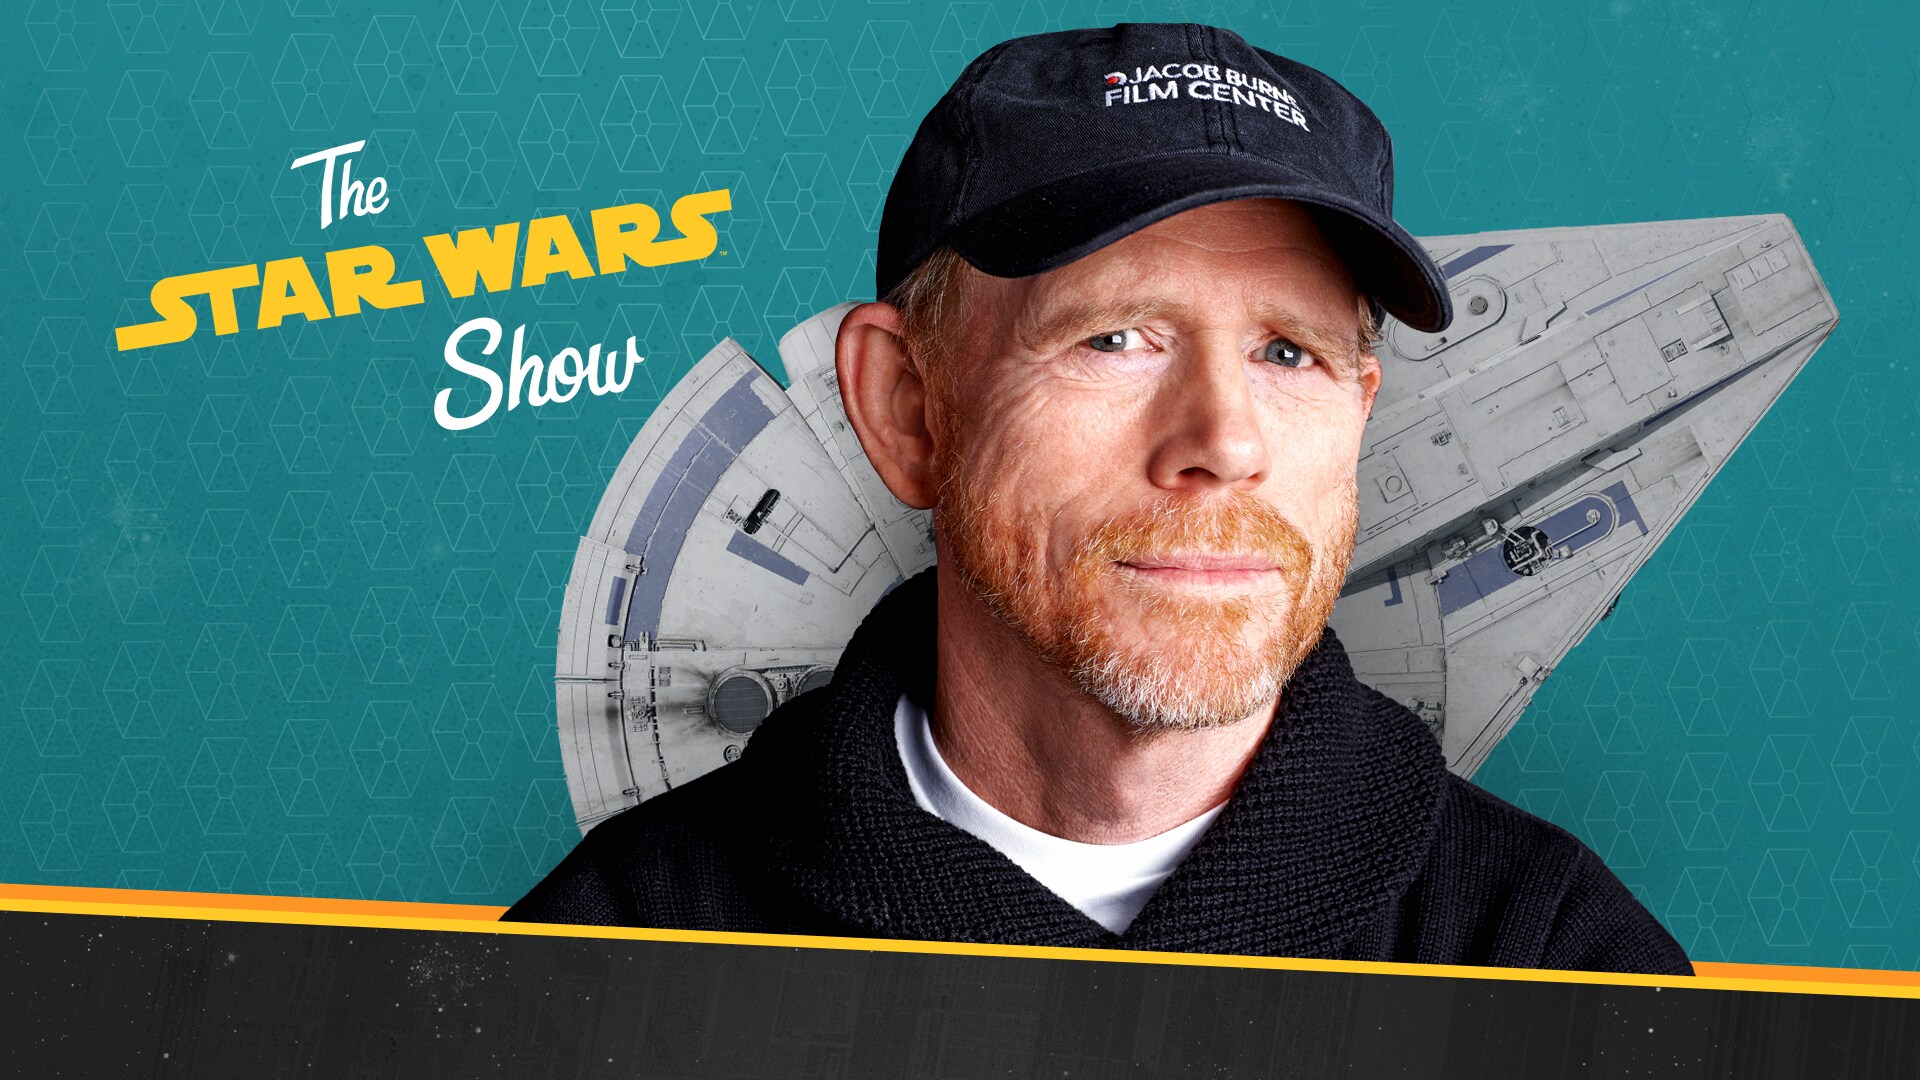 Solo Director Ron Howard Stops By to Give Star Wars the Arrested Development Treatment